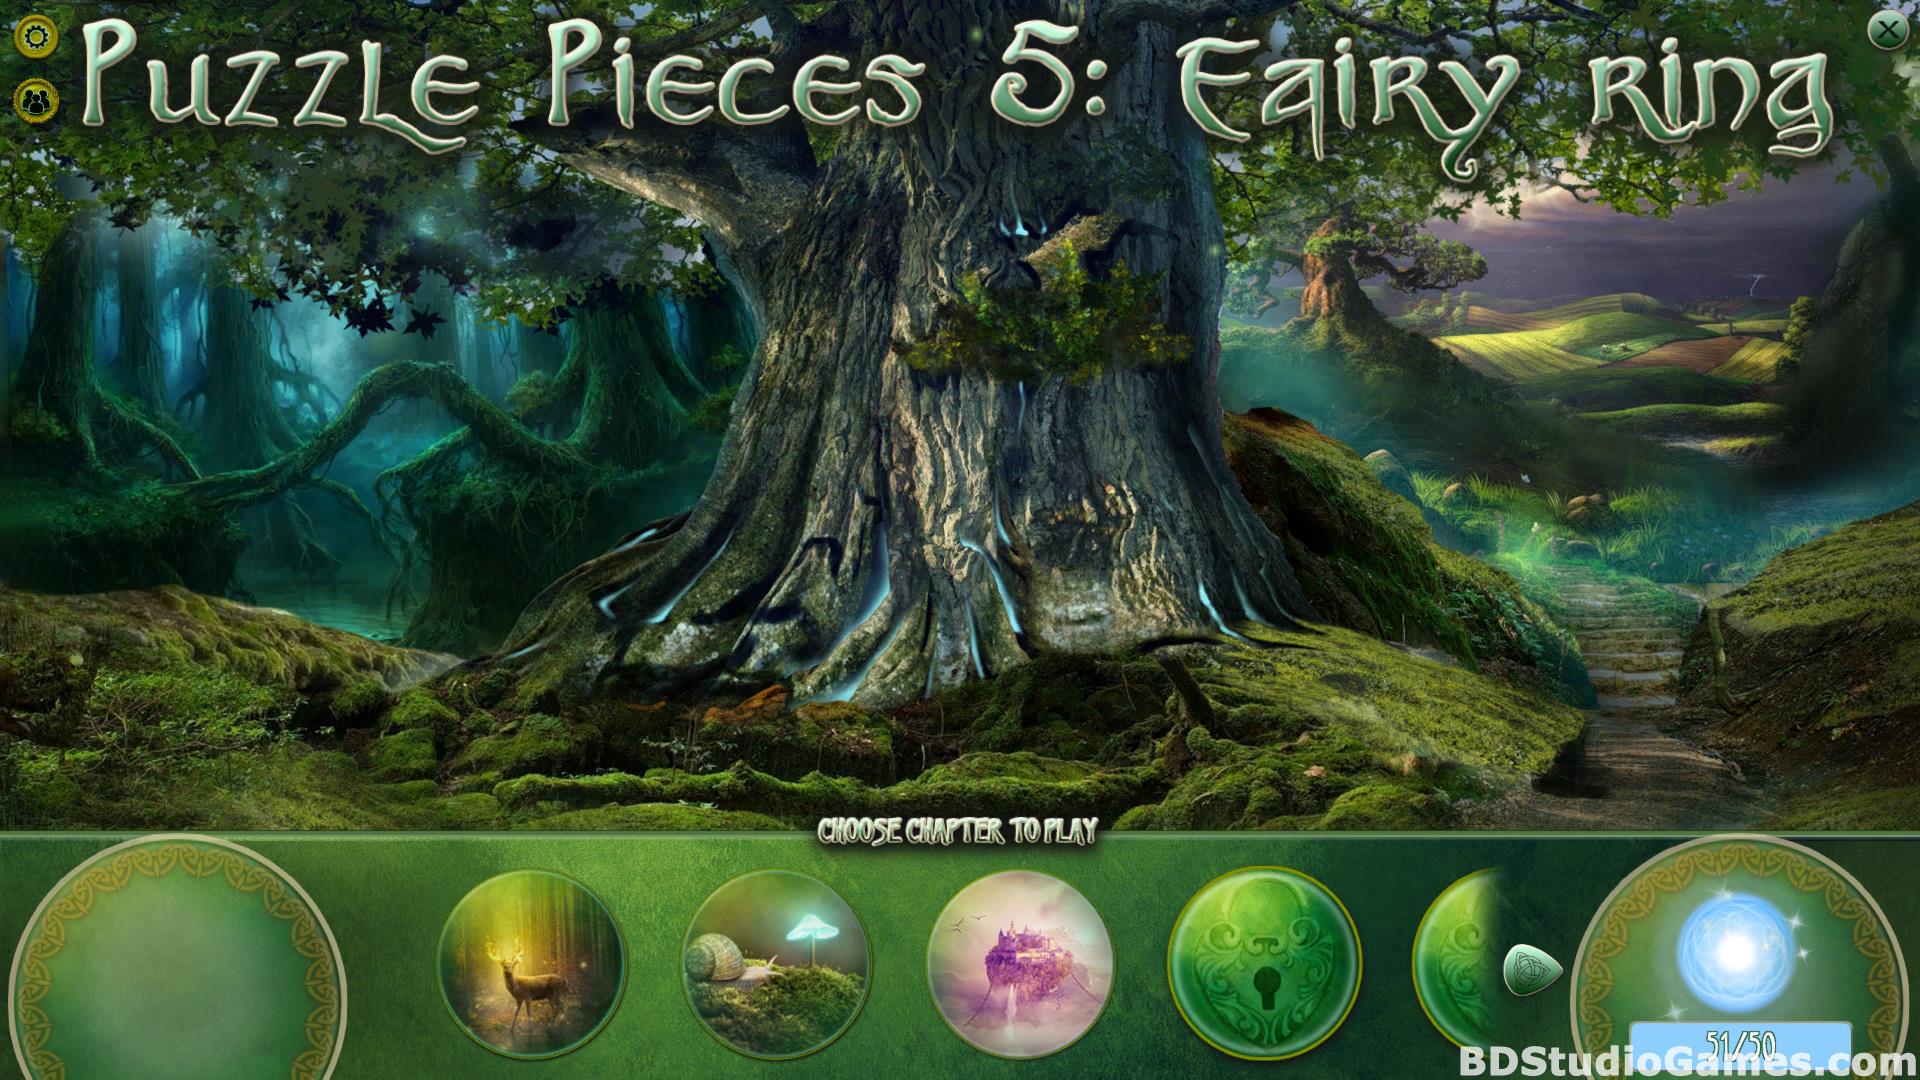 Puzzle Pieces 5: Fairy Ring Free Download Screenshots 01